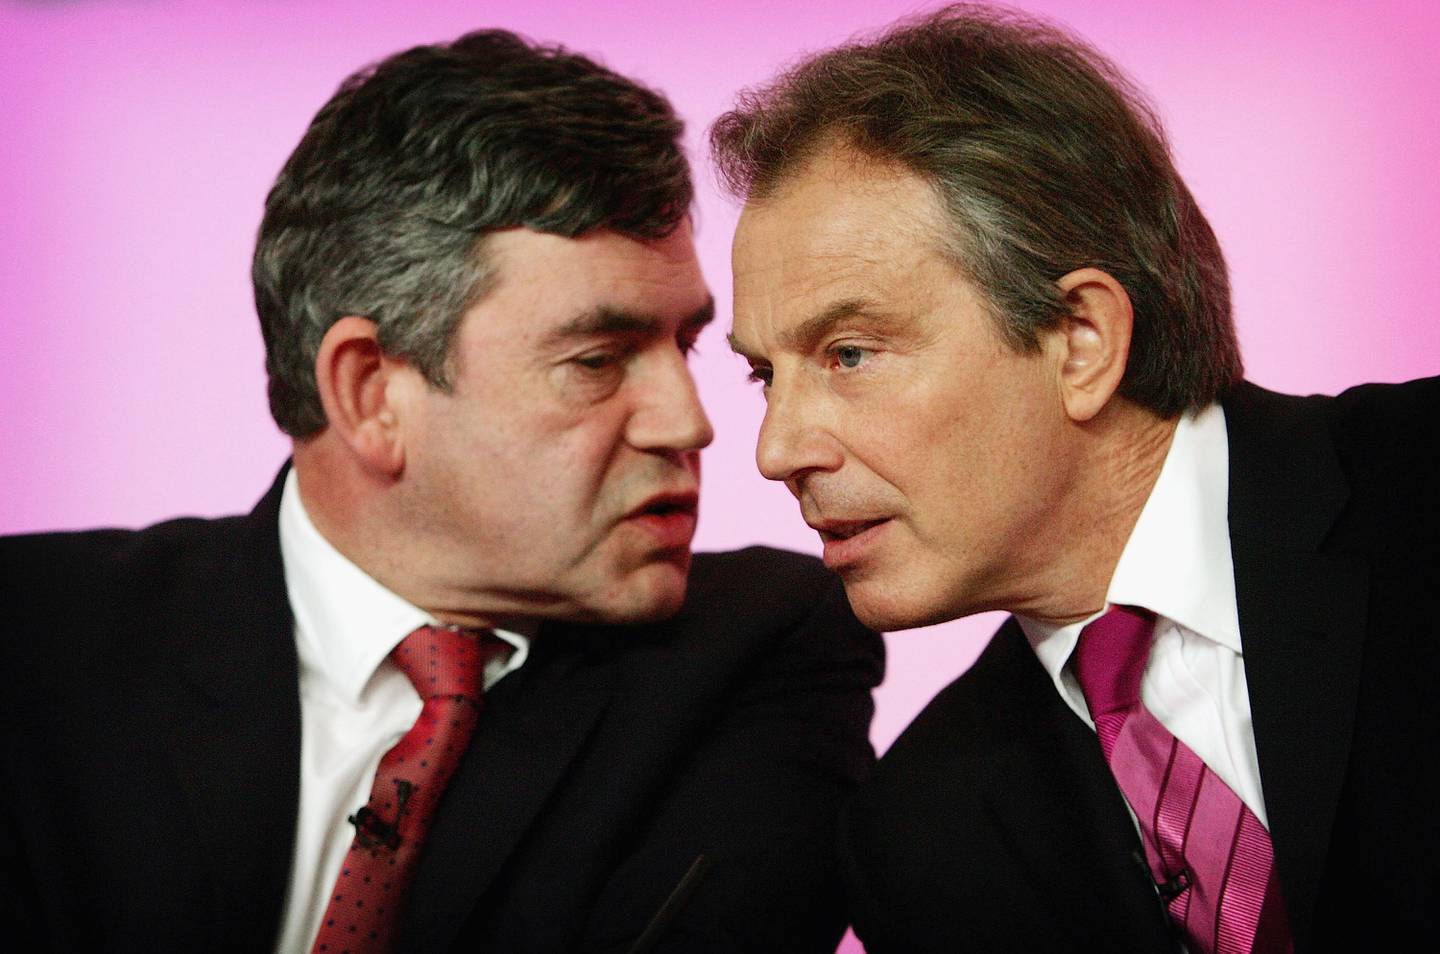 Gordon Brown, left, took over from Tony Blair but was voted out. Getty Images